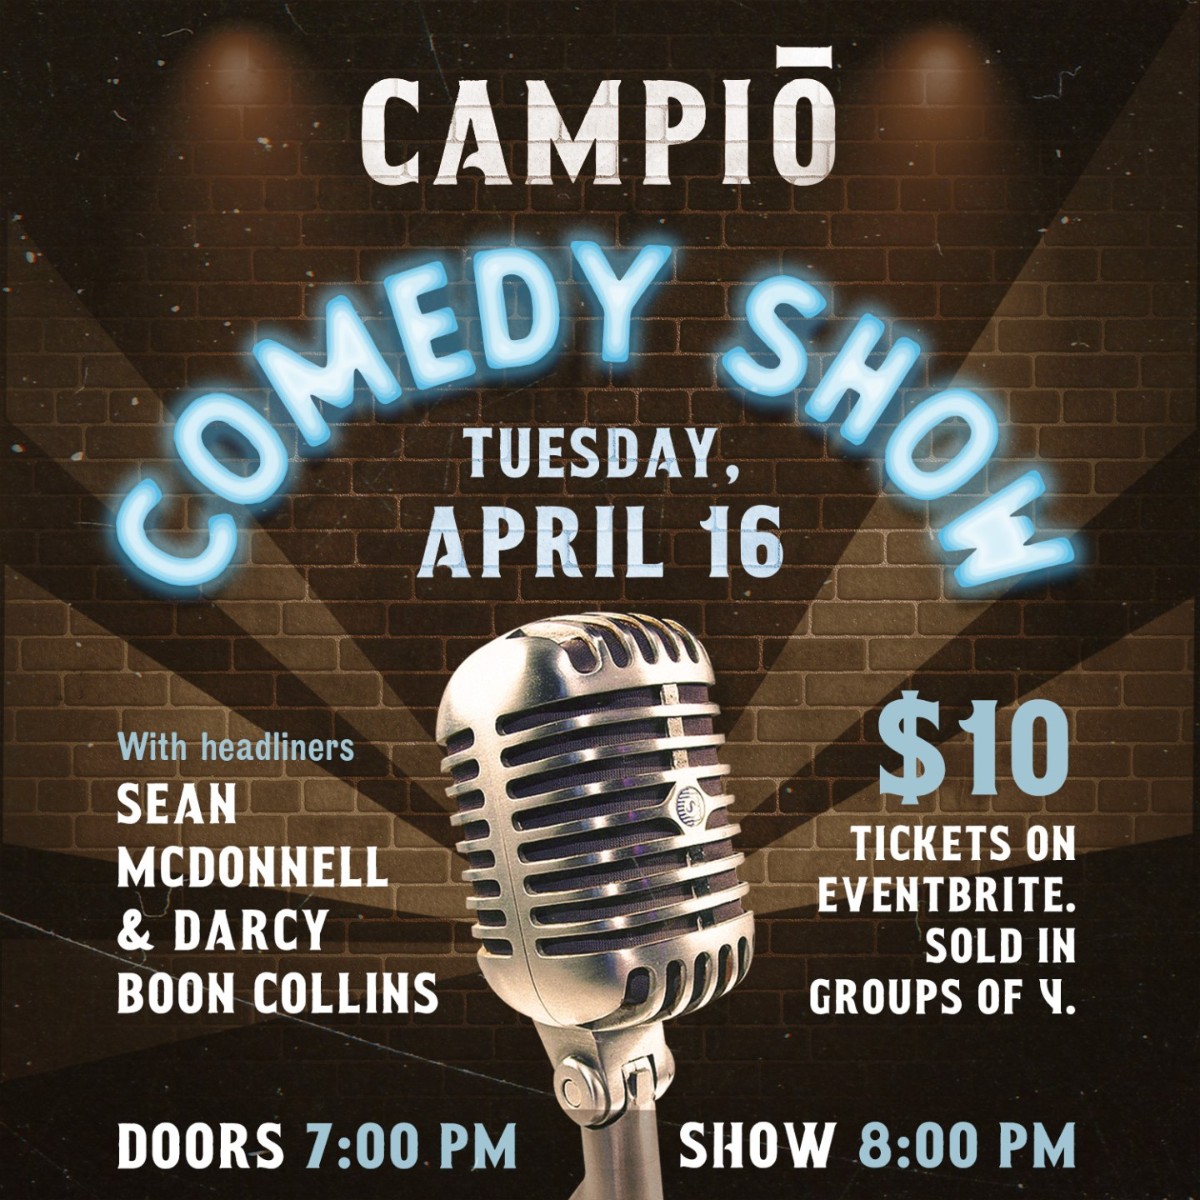 Join us for a good ol' fashioned laugh at the Campio Comedy Show! Tickets are available here: brnw.ch/21wItZp Get yours before they're gone!